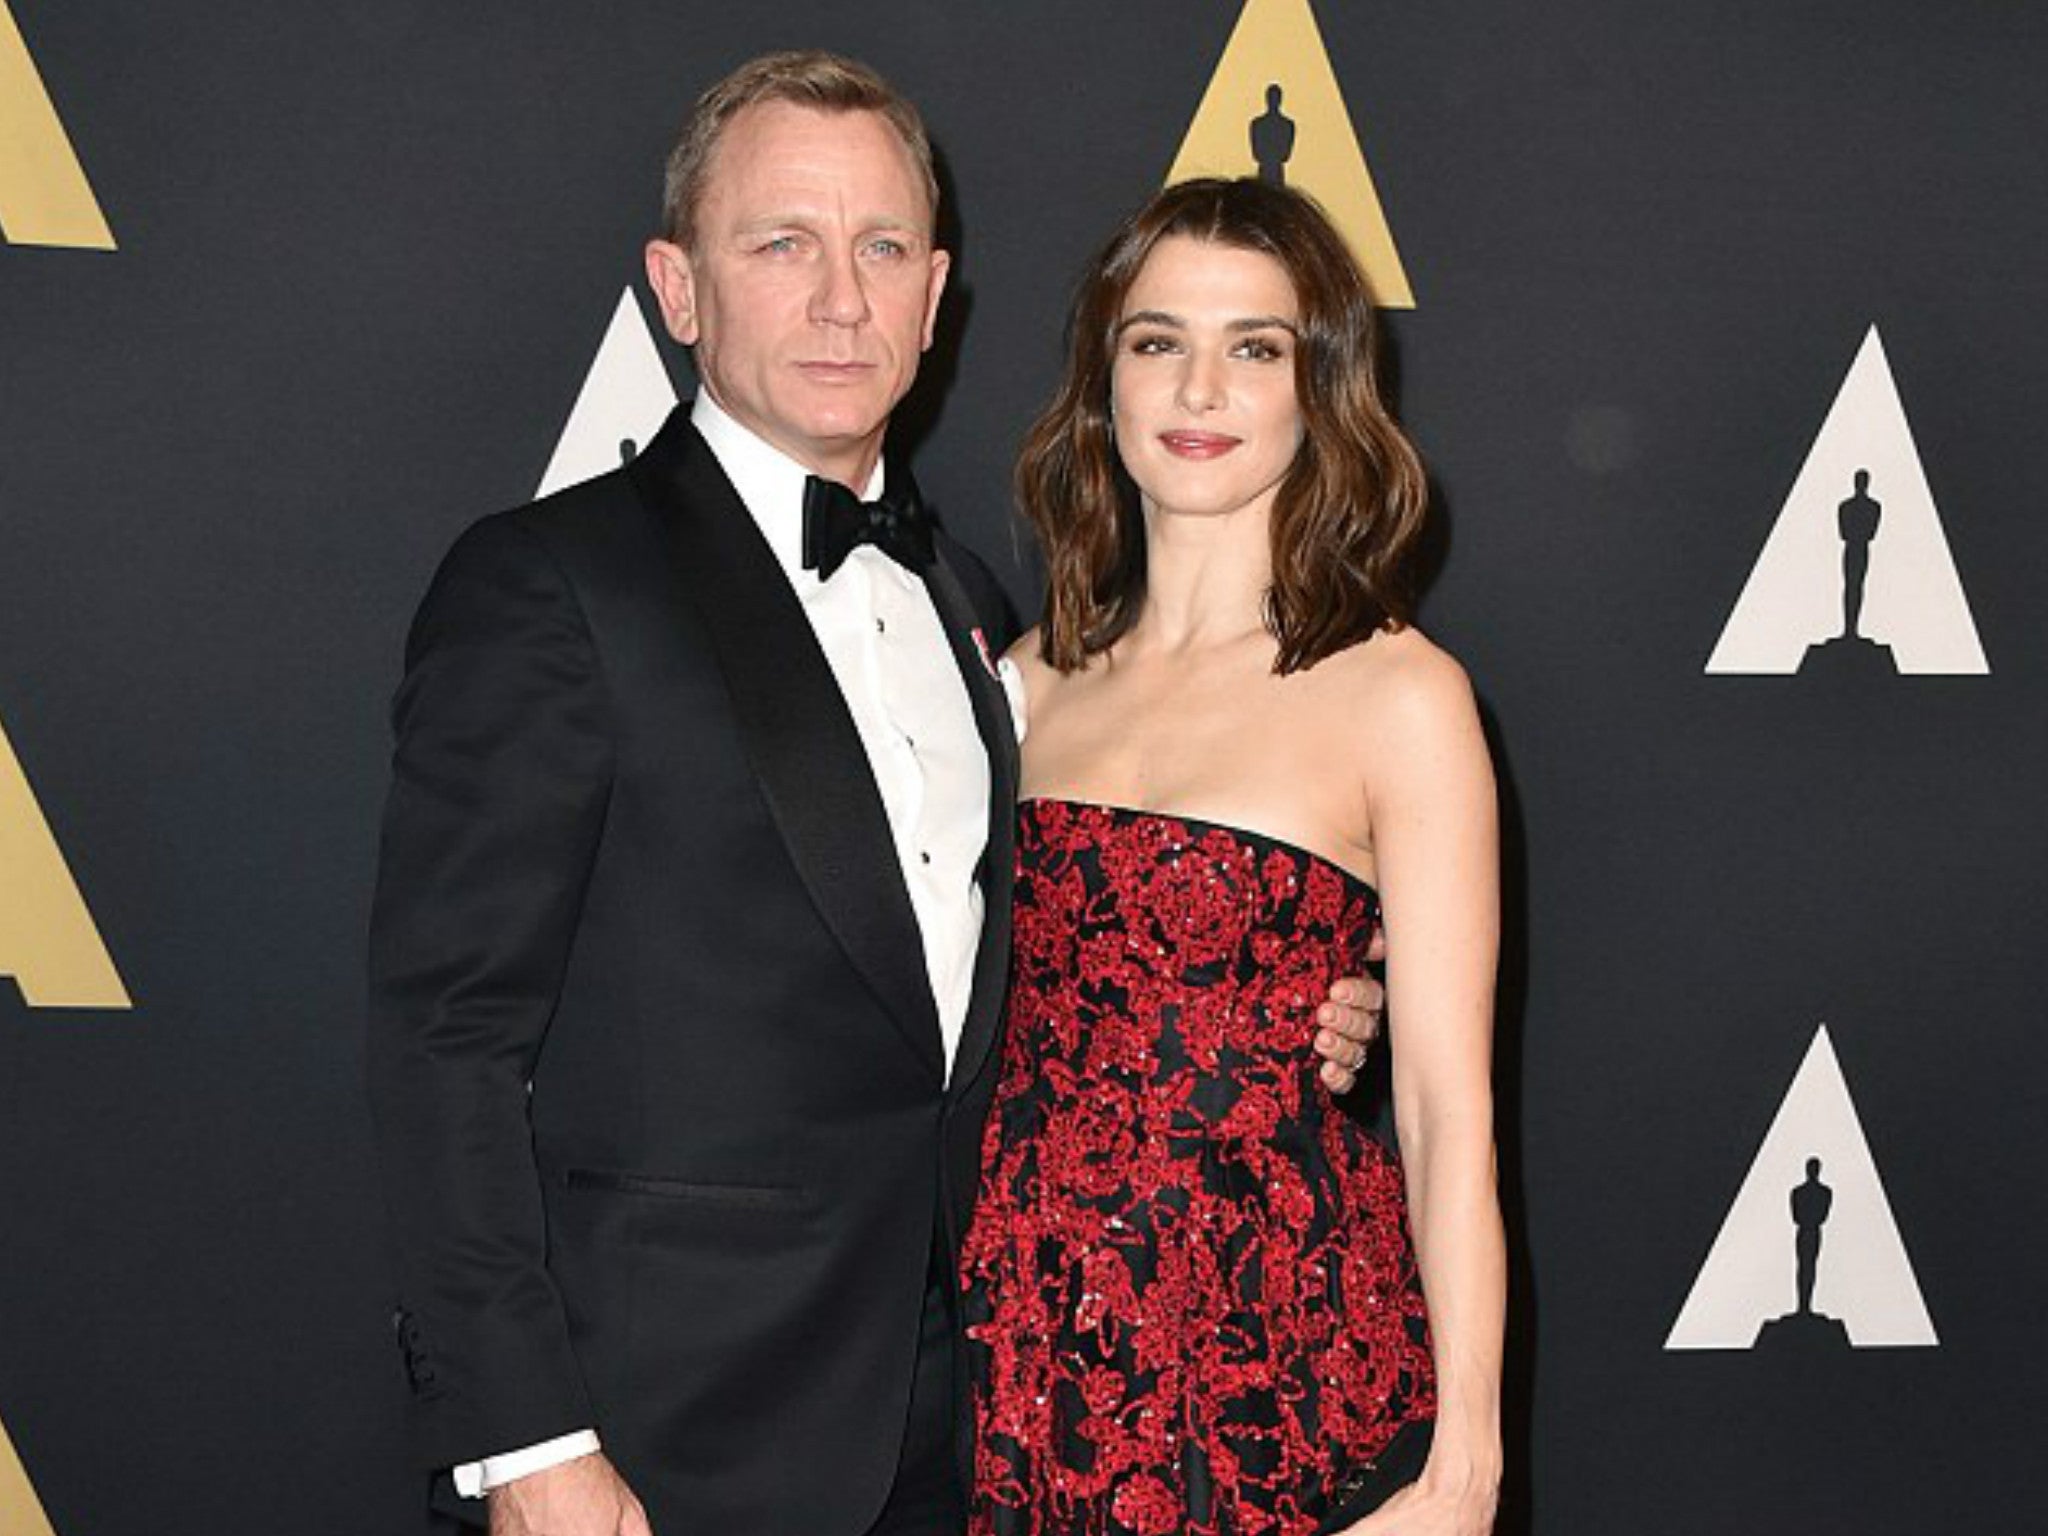 Daniel Craig, dressed in the GOSH tuxedo lot, poses on the red carpet with Rachel Weisz at the Governors Awards in Hollywood last November